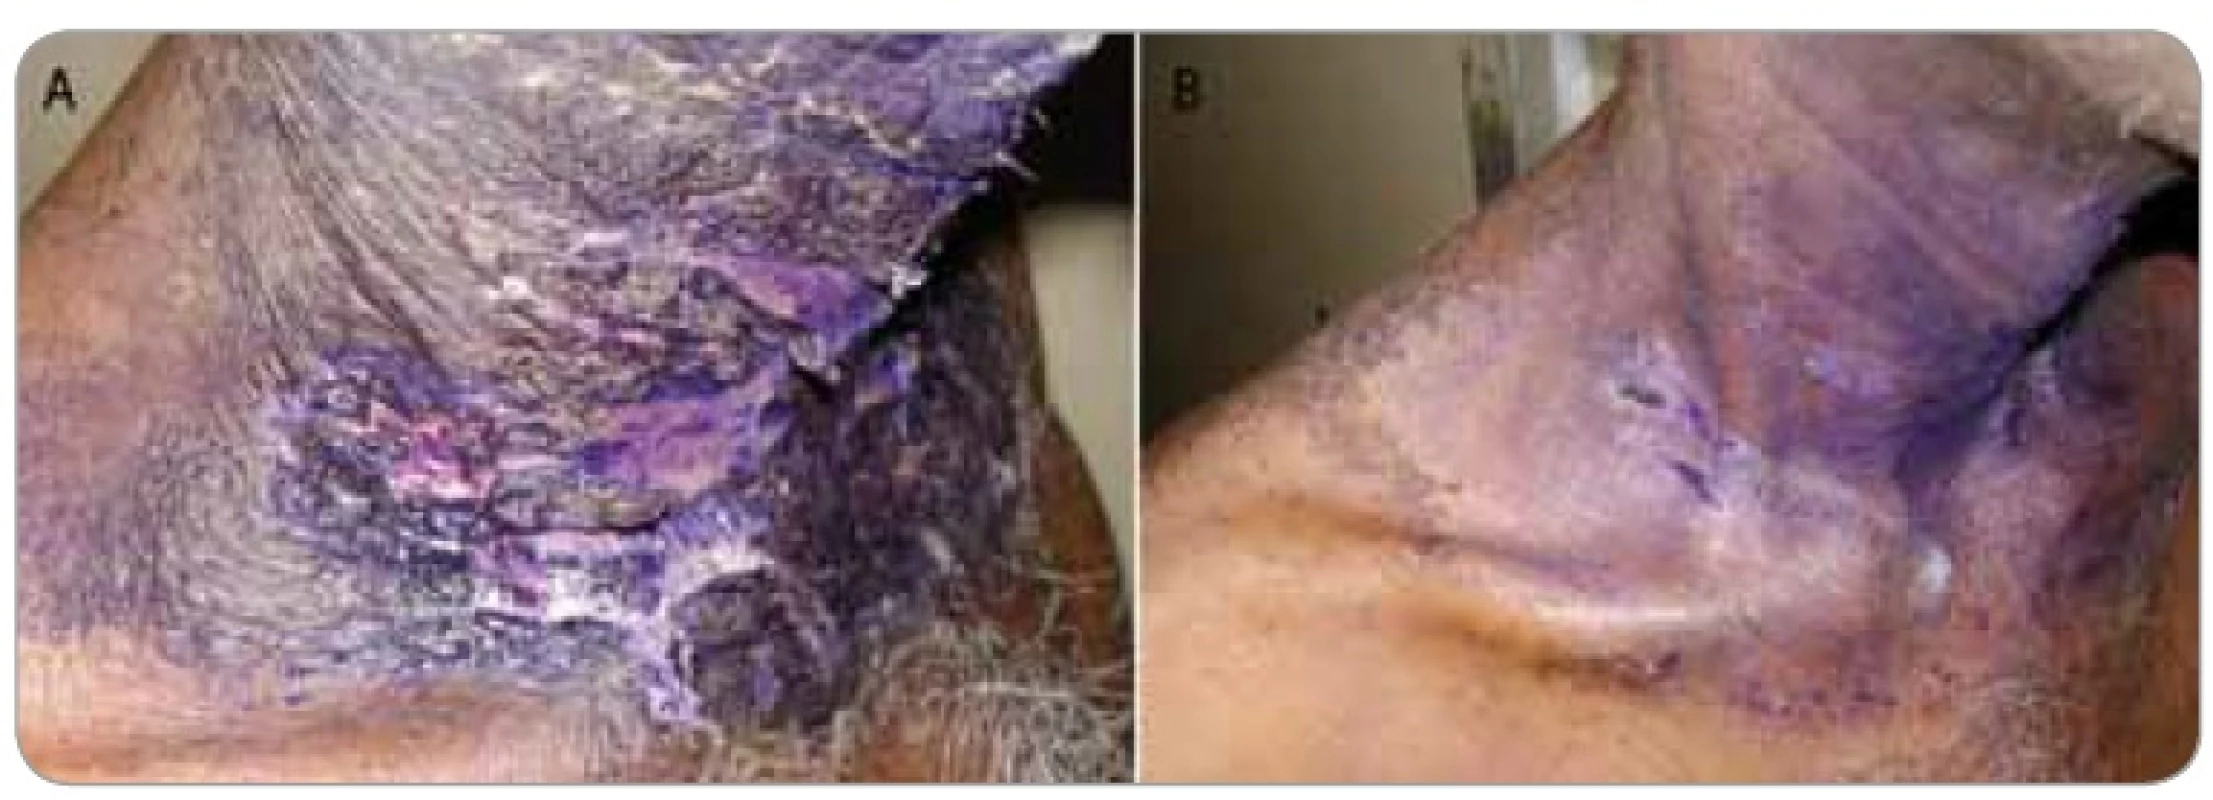 Fig. 3A shows a 55-year-old male on treatment with external radiotherapy for a head and neck malignancy with grade III moist desquamation that had developed in the 5th week of treatment and was treated with GV paint for 1 week without any response and the wet skin moist desquamtion persisted and the patient was referred to us for cytokine therapy. Fig. 3B shows the same patient with remarkable resolution of lesion by day 5 after a single dose of GCSF injection. He was able to reassume radiotherapy within a week.